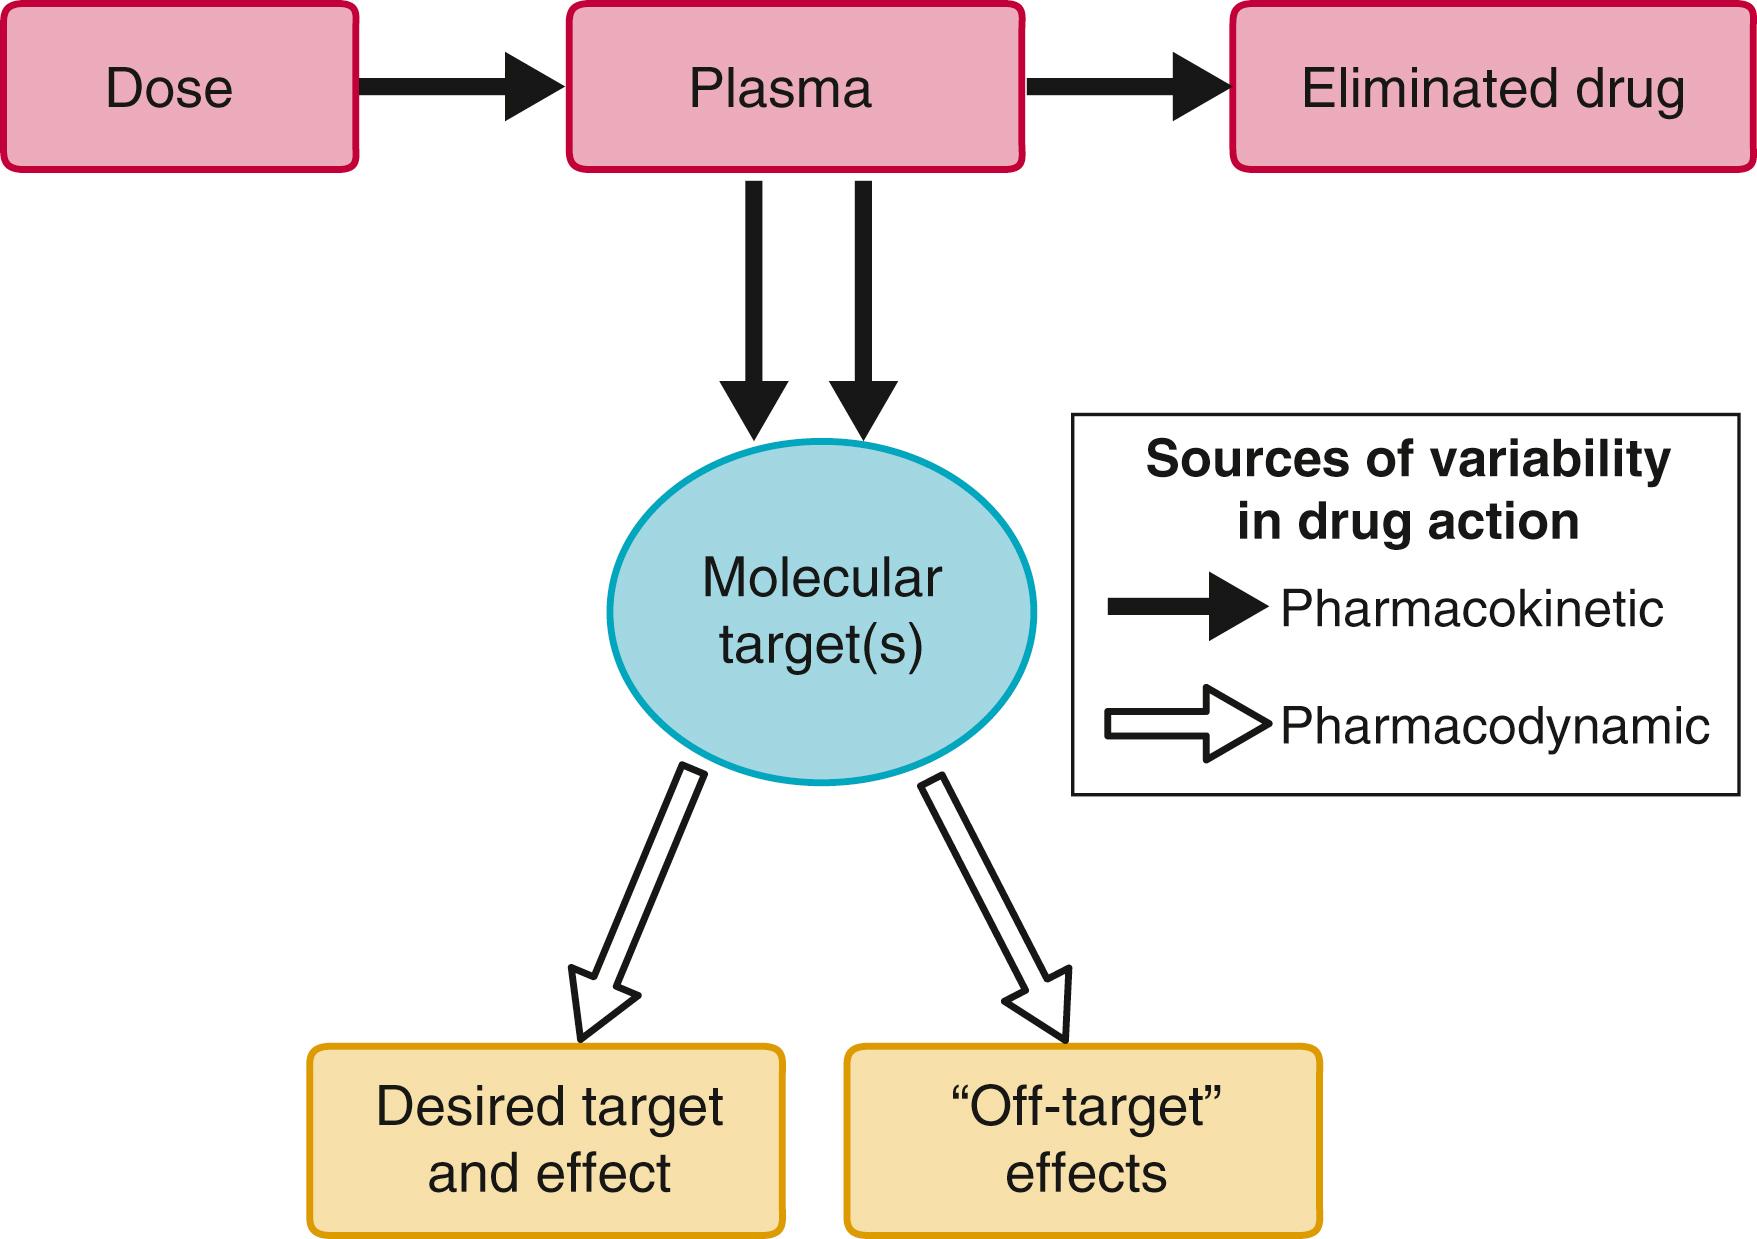 FIGURE 9.2, Pharmacokinetic and pharmacodynamic sources of variability in drug action. Pharmacokinetic processes determine drug concentration at molecular targets that through multiple mechanisms broadly termed pharmacodynamics transduce beneficial and undesirable drug effects.